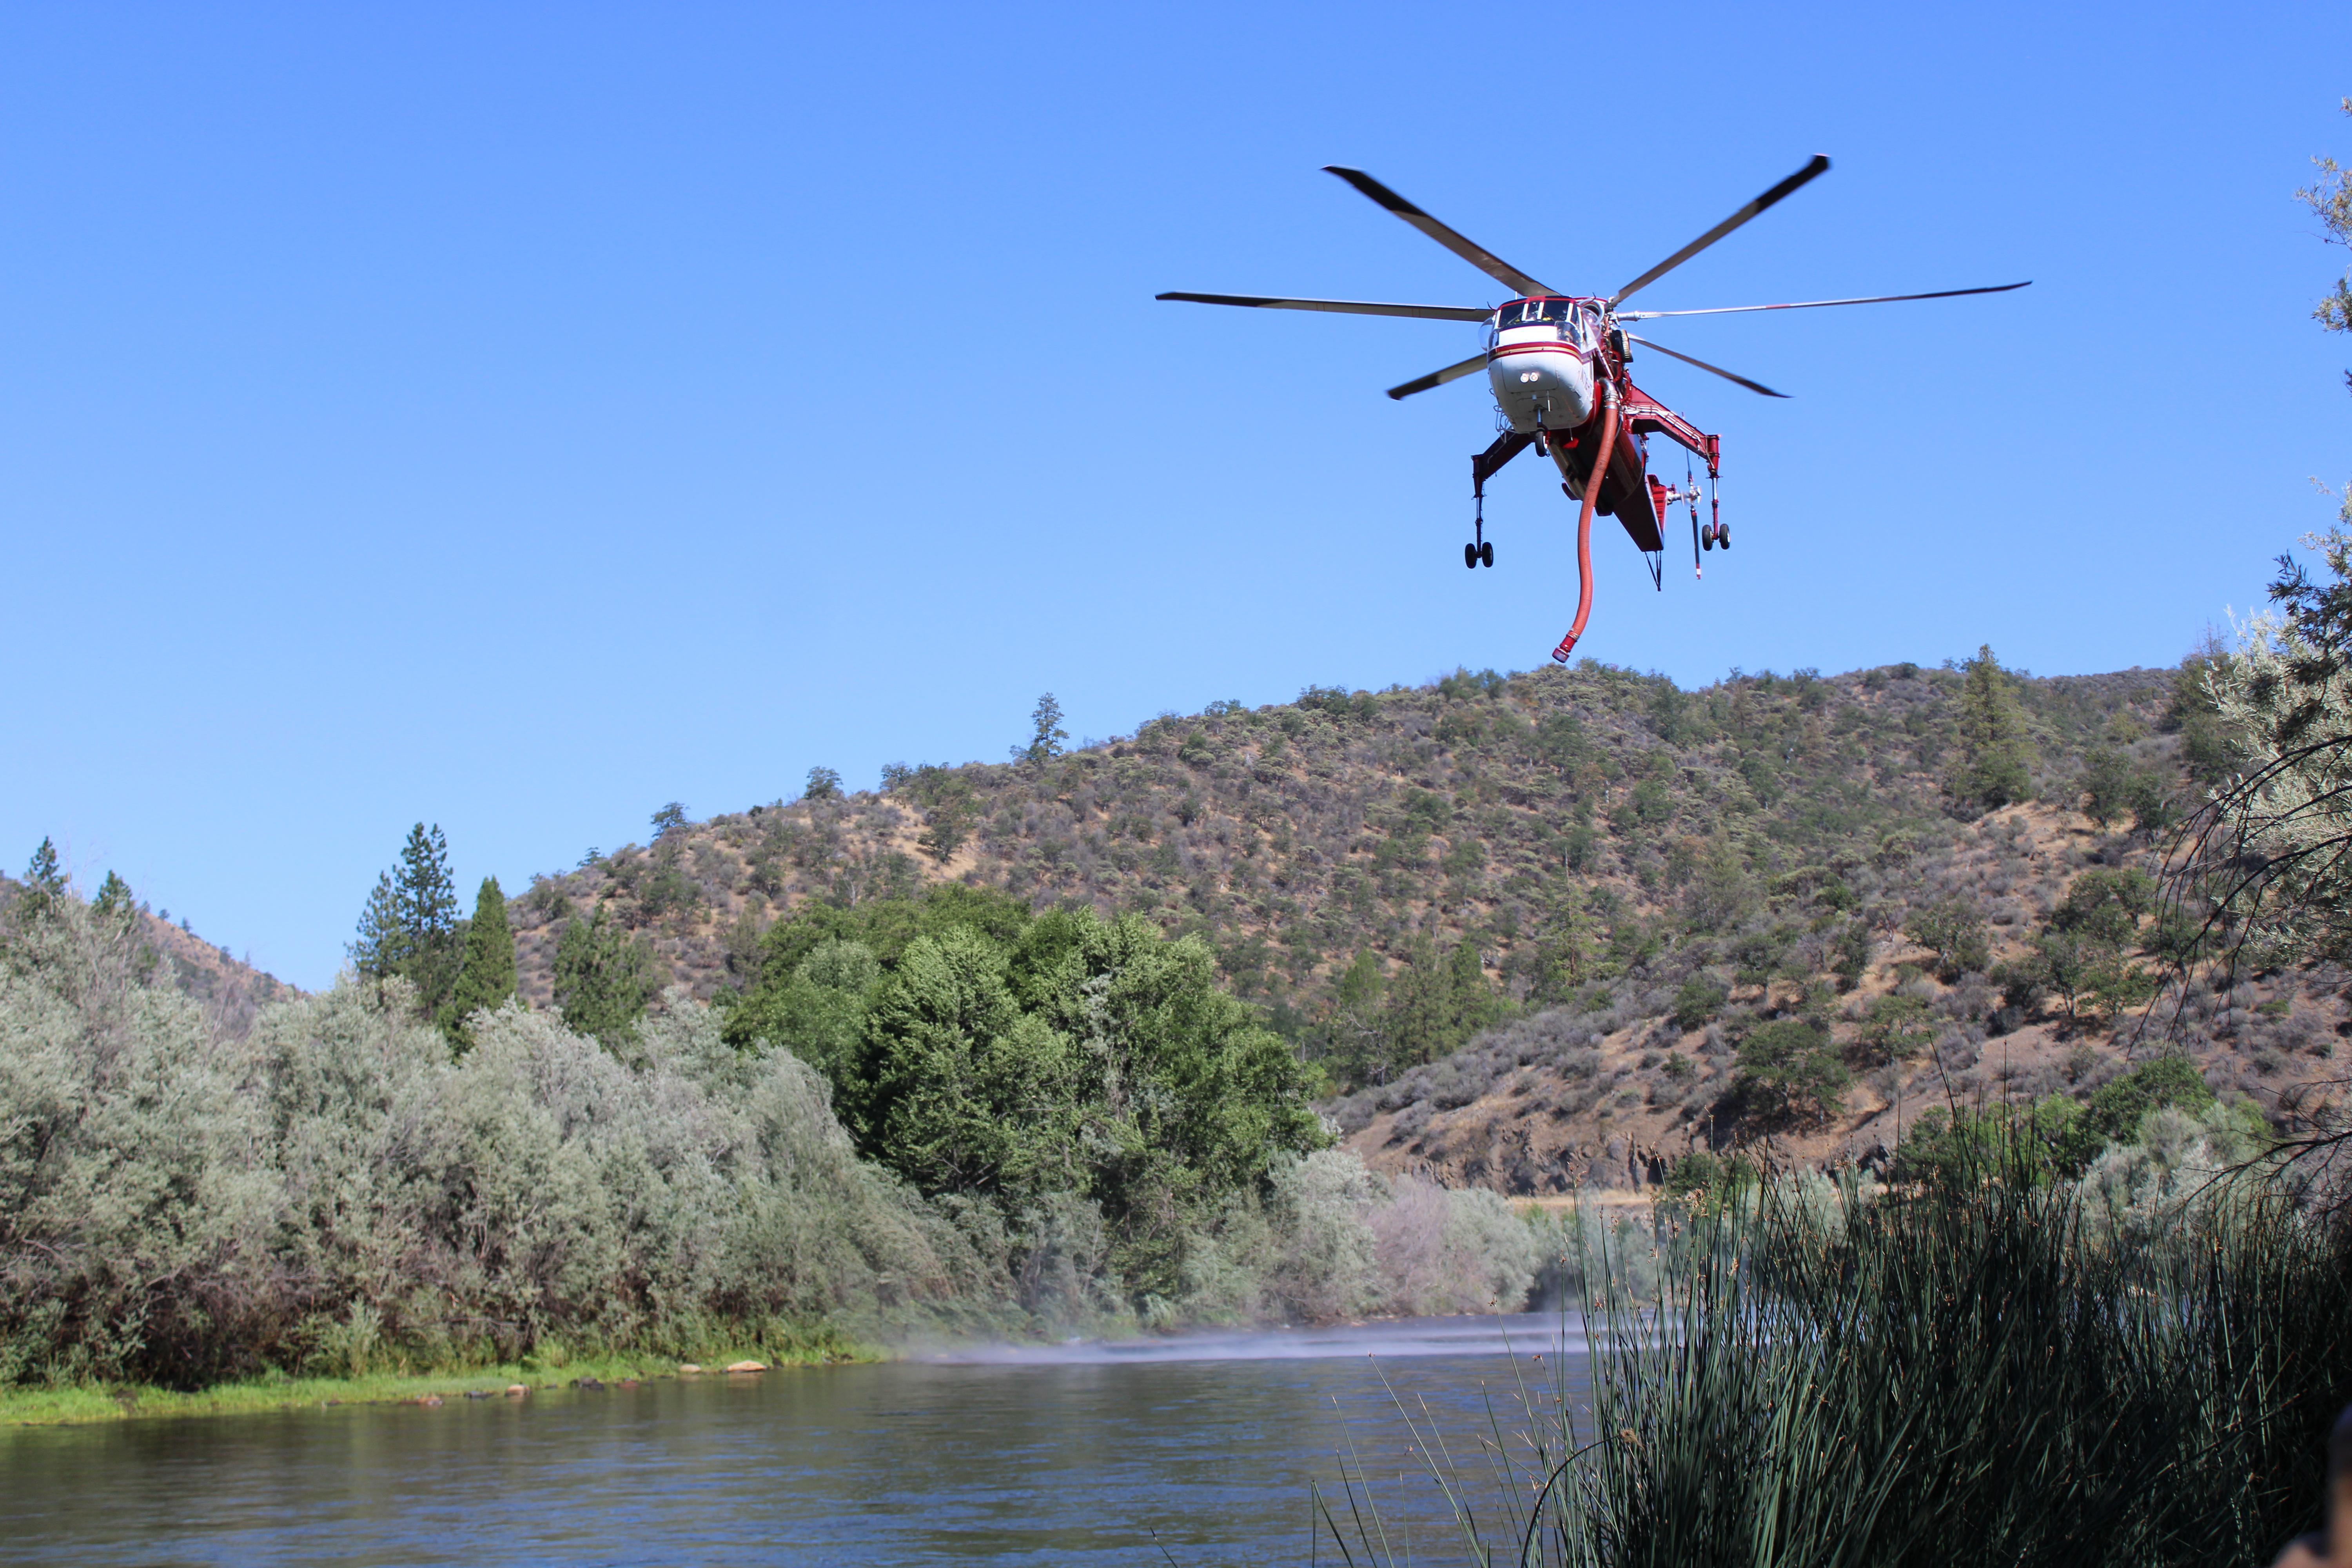 Helicopter transport Service helicopter 6HT dipping snorkel in Klamath River to fill with water 